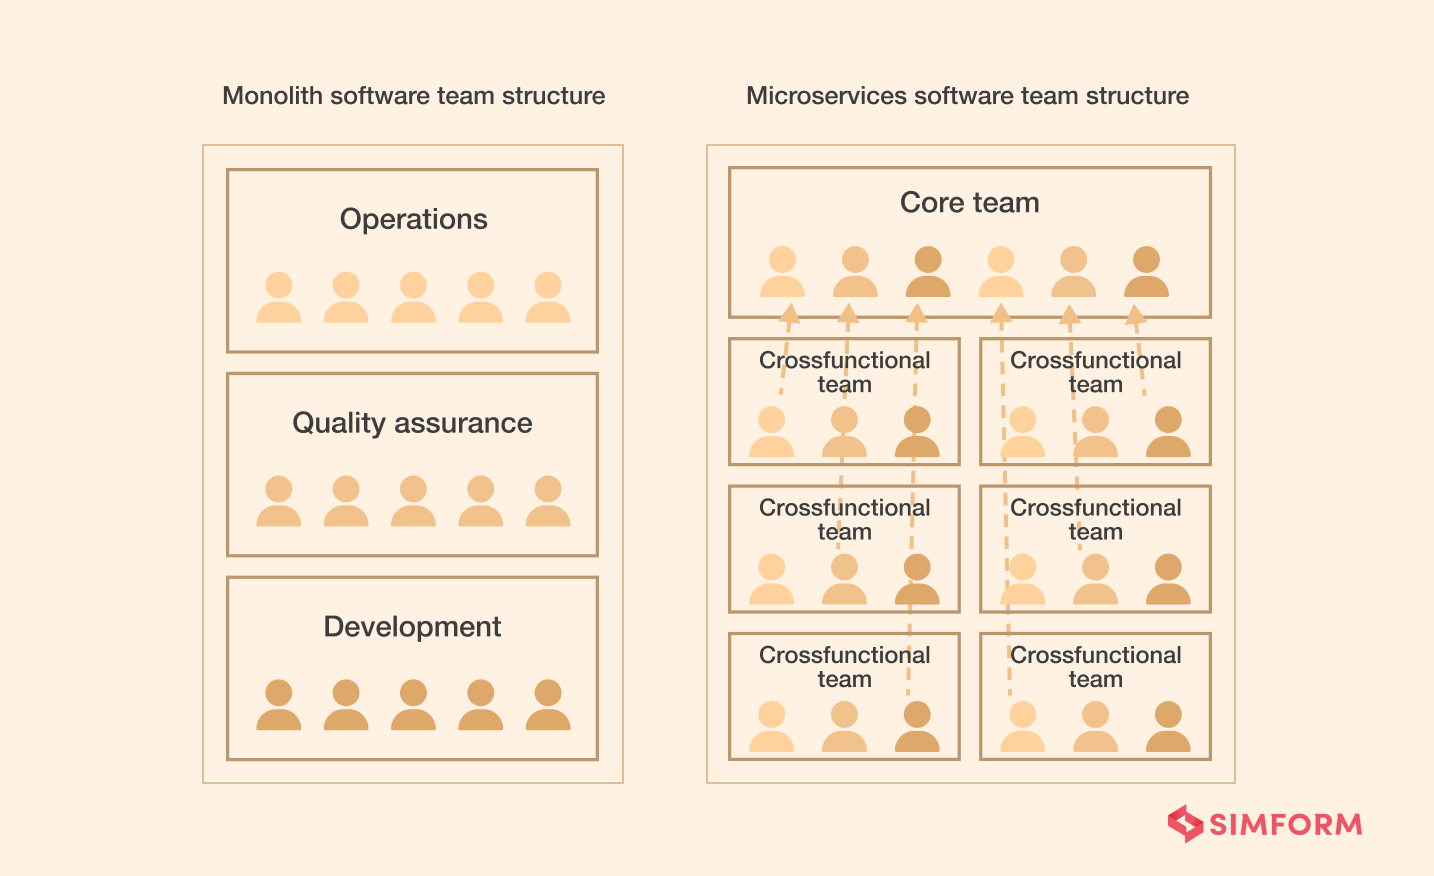 Monoliths vs microservices team structure